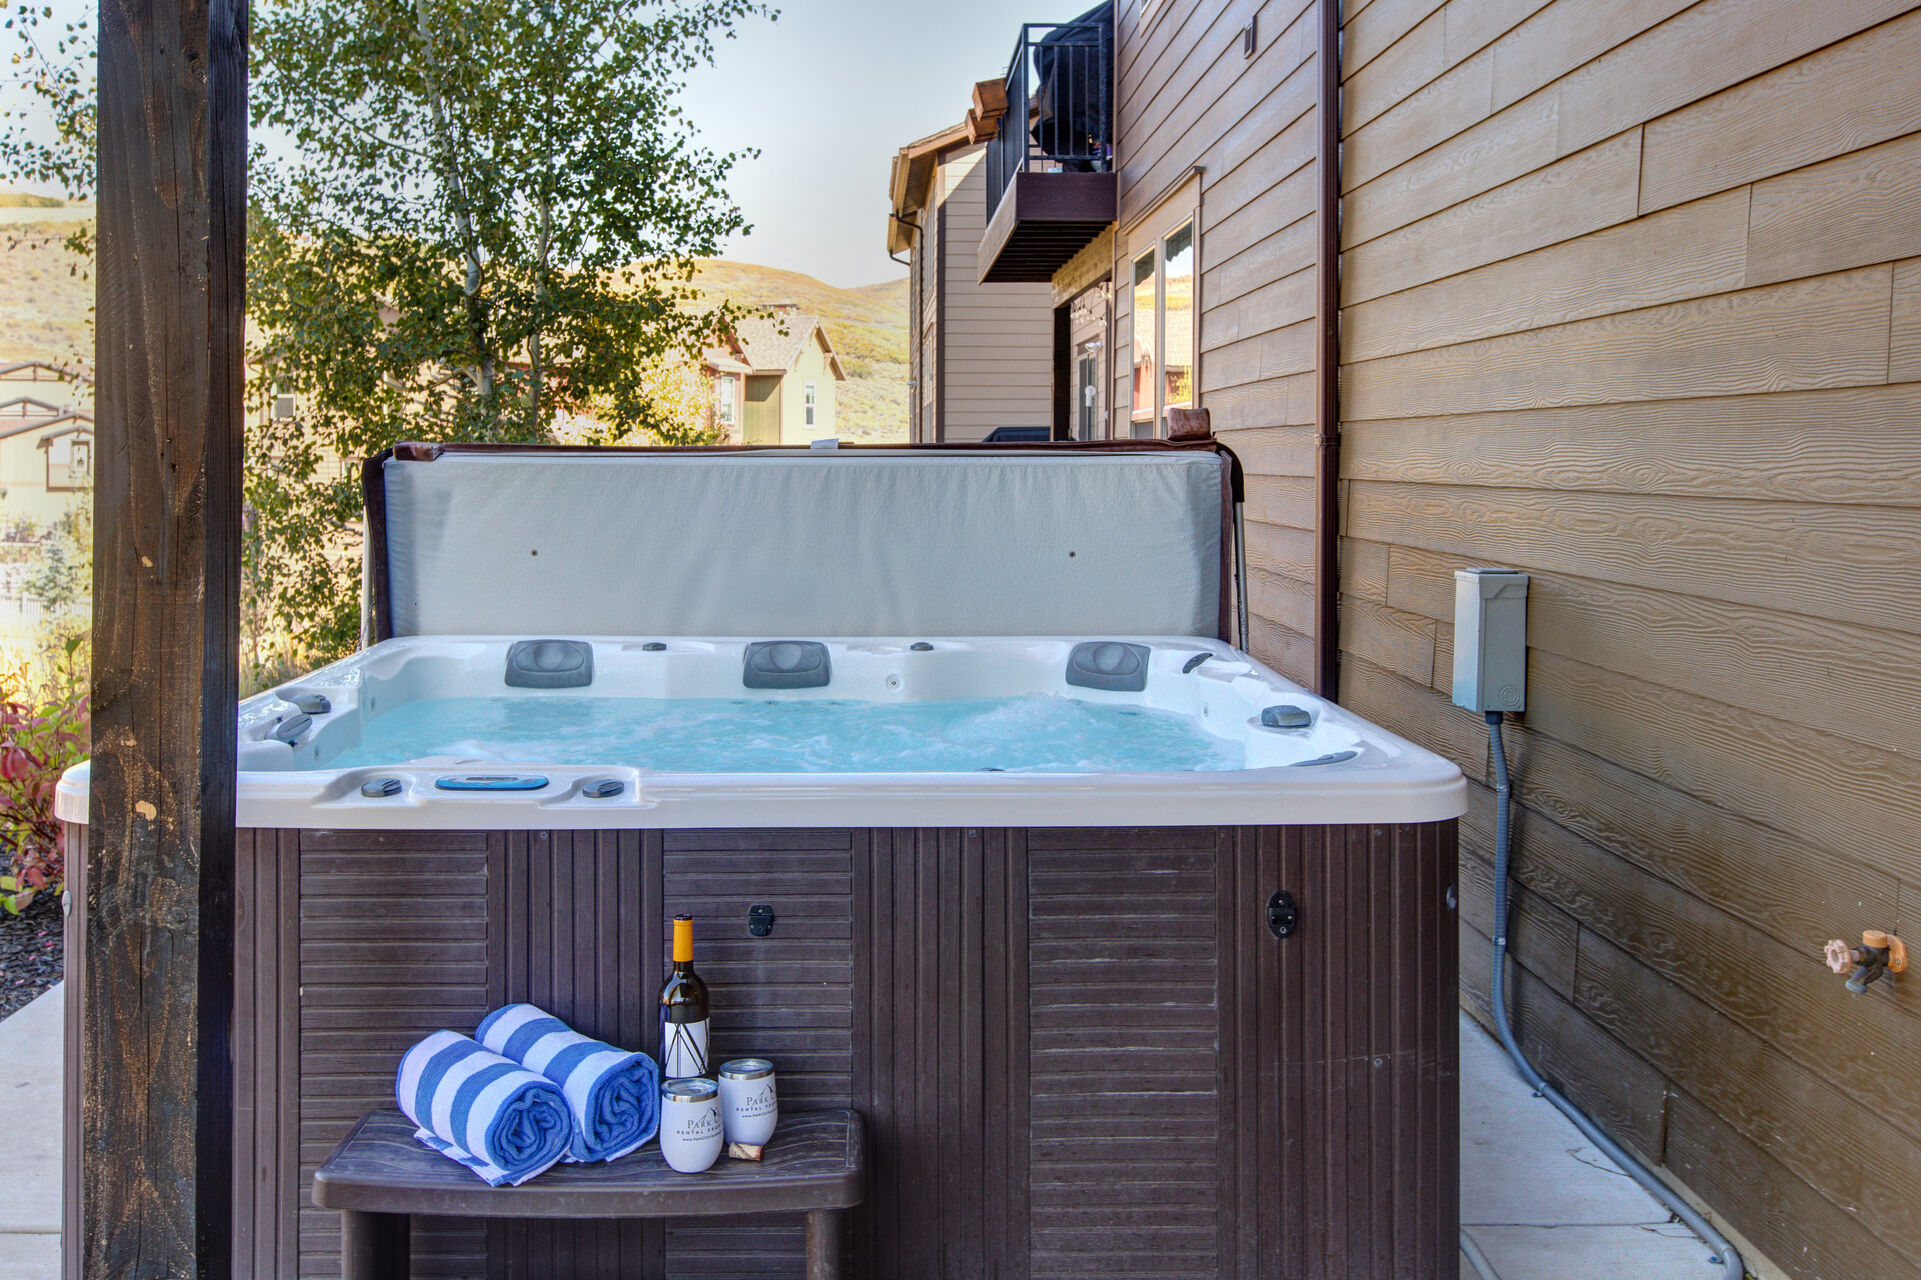 Lower level private hot tub patio with seating for two, and surrounding views